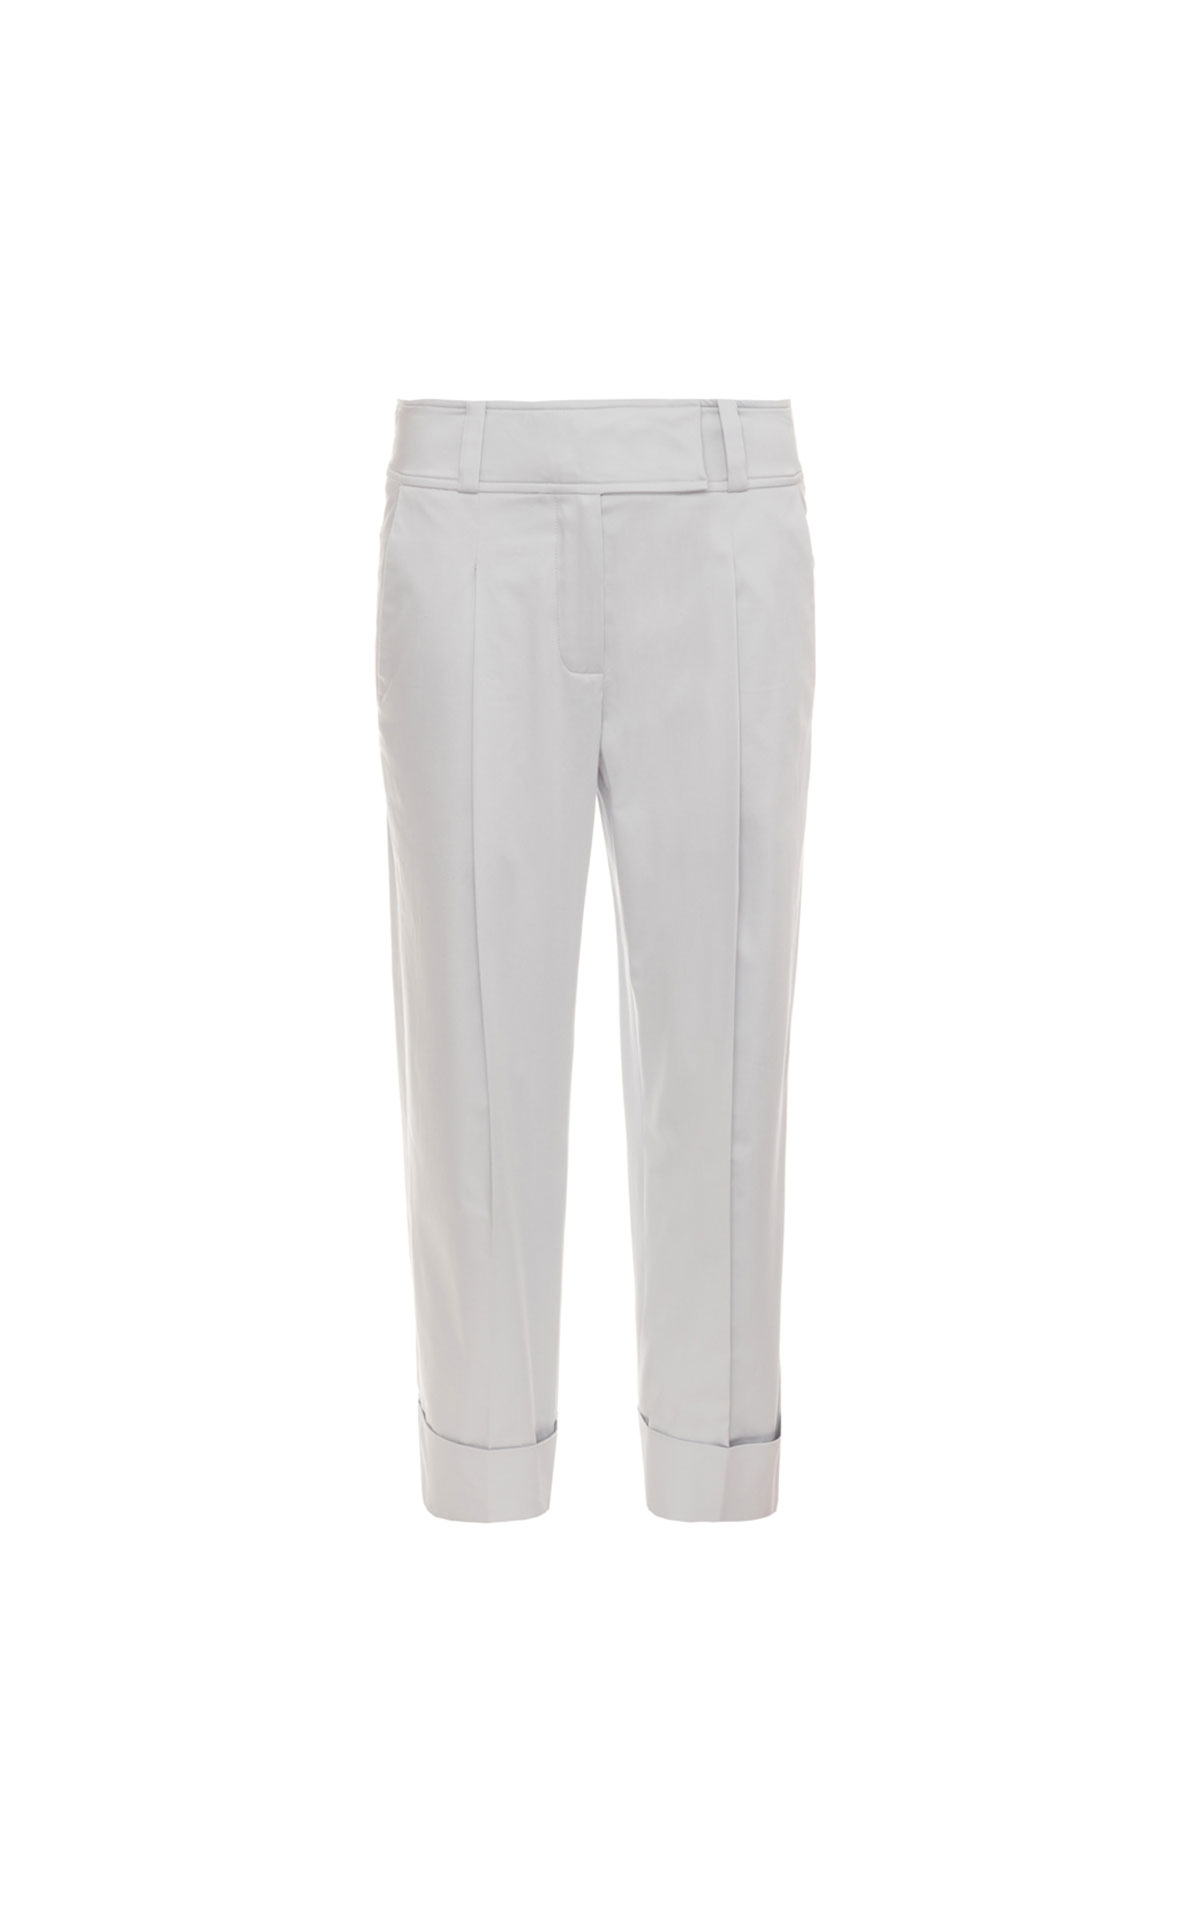 Eleventy Cotton turned up trousers womens from Bicester Village